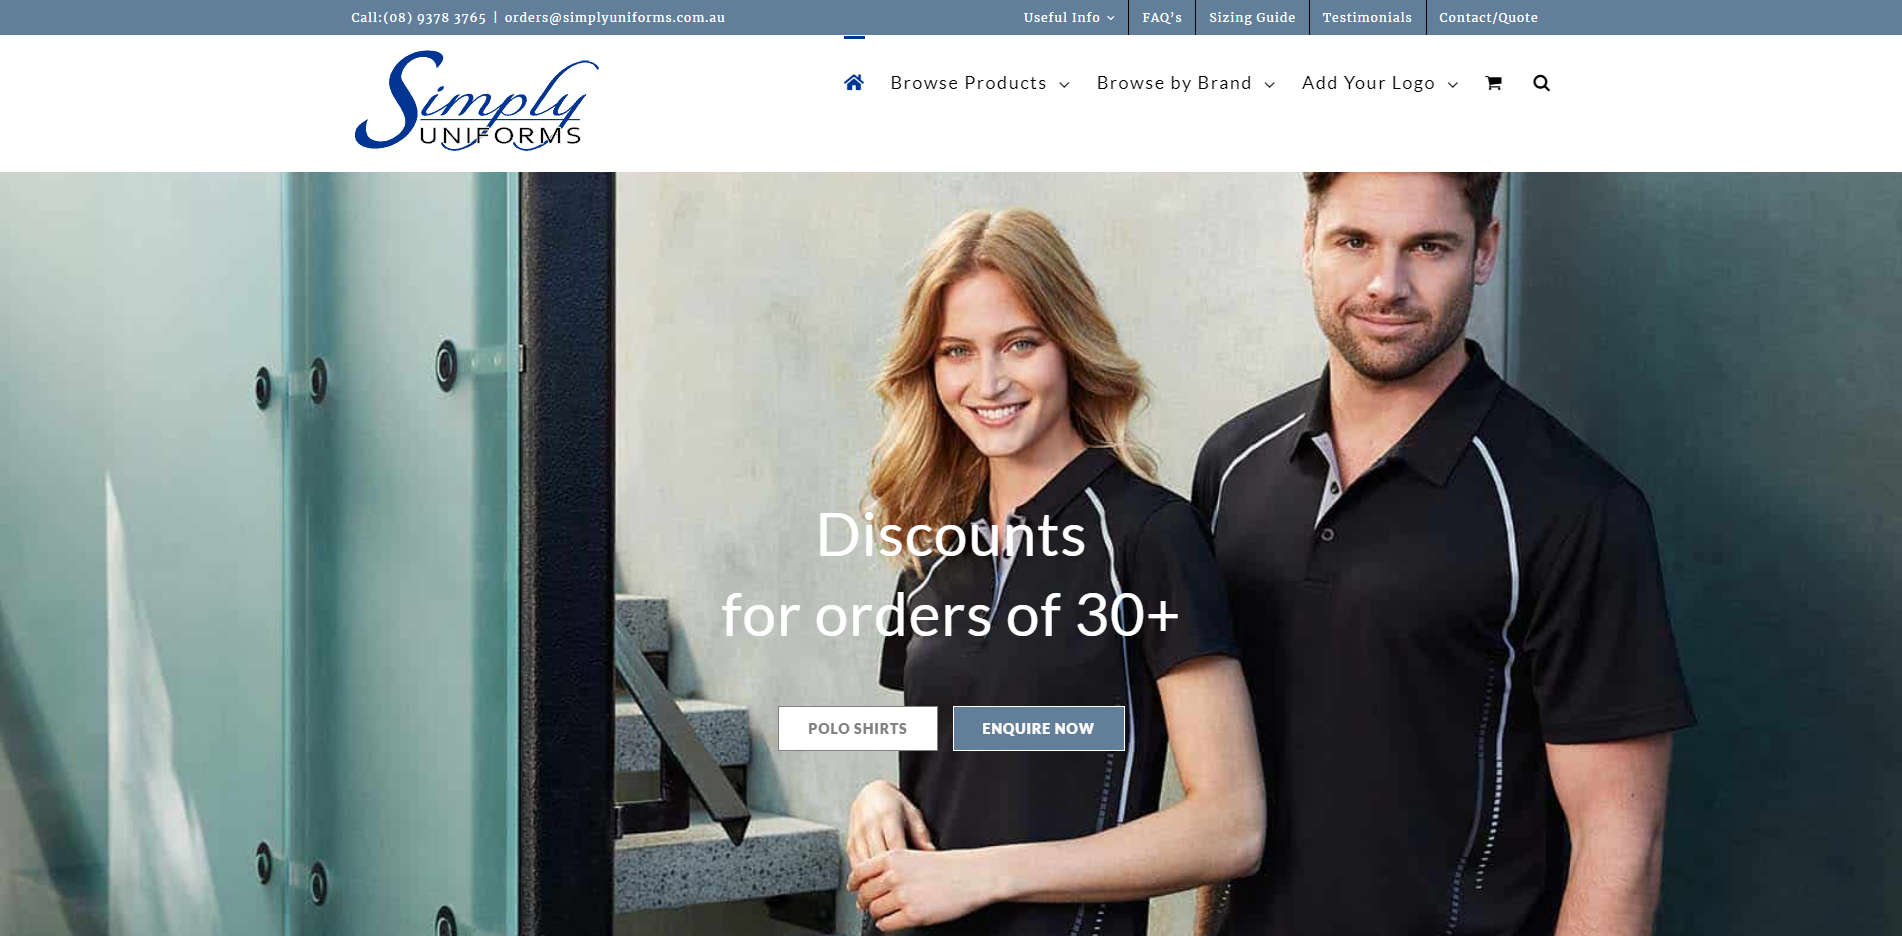 The landing page and home page of simply uniforms website australia bulk discount uniform supplier